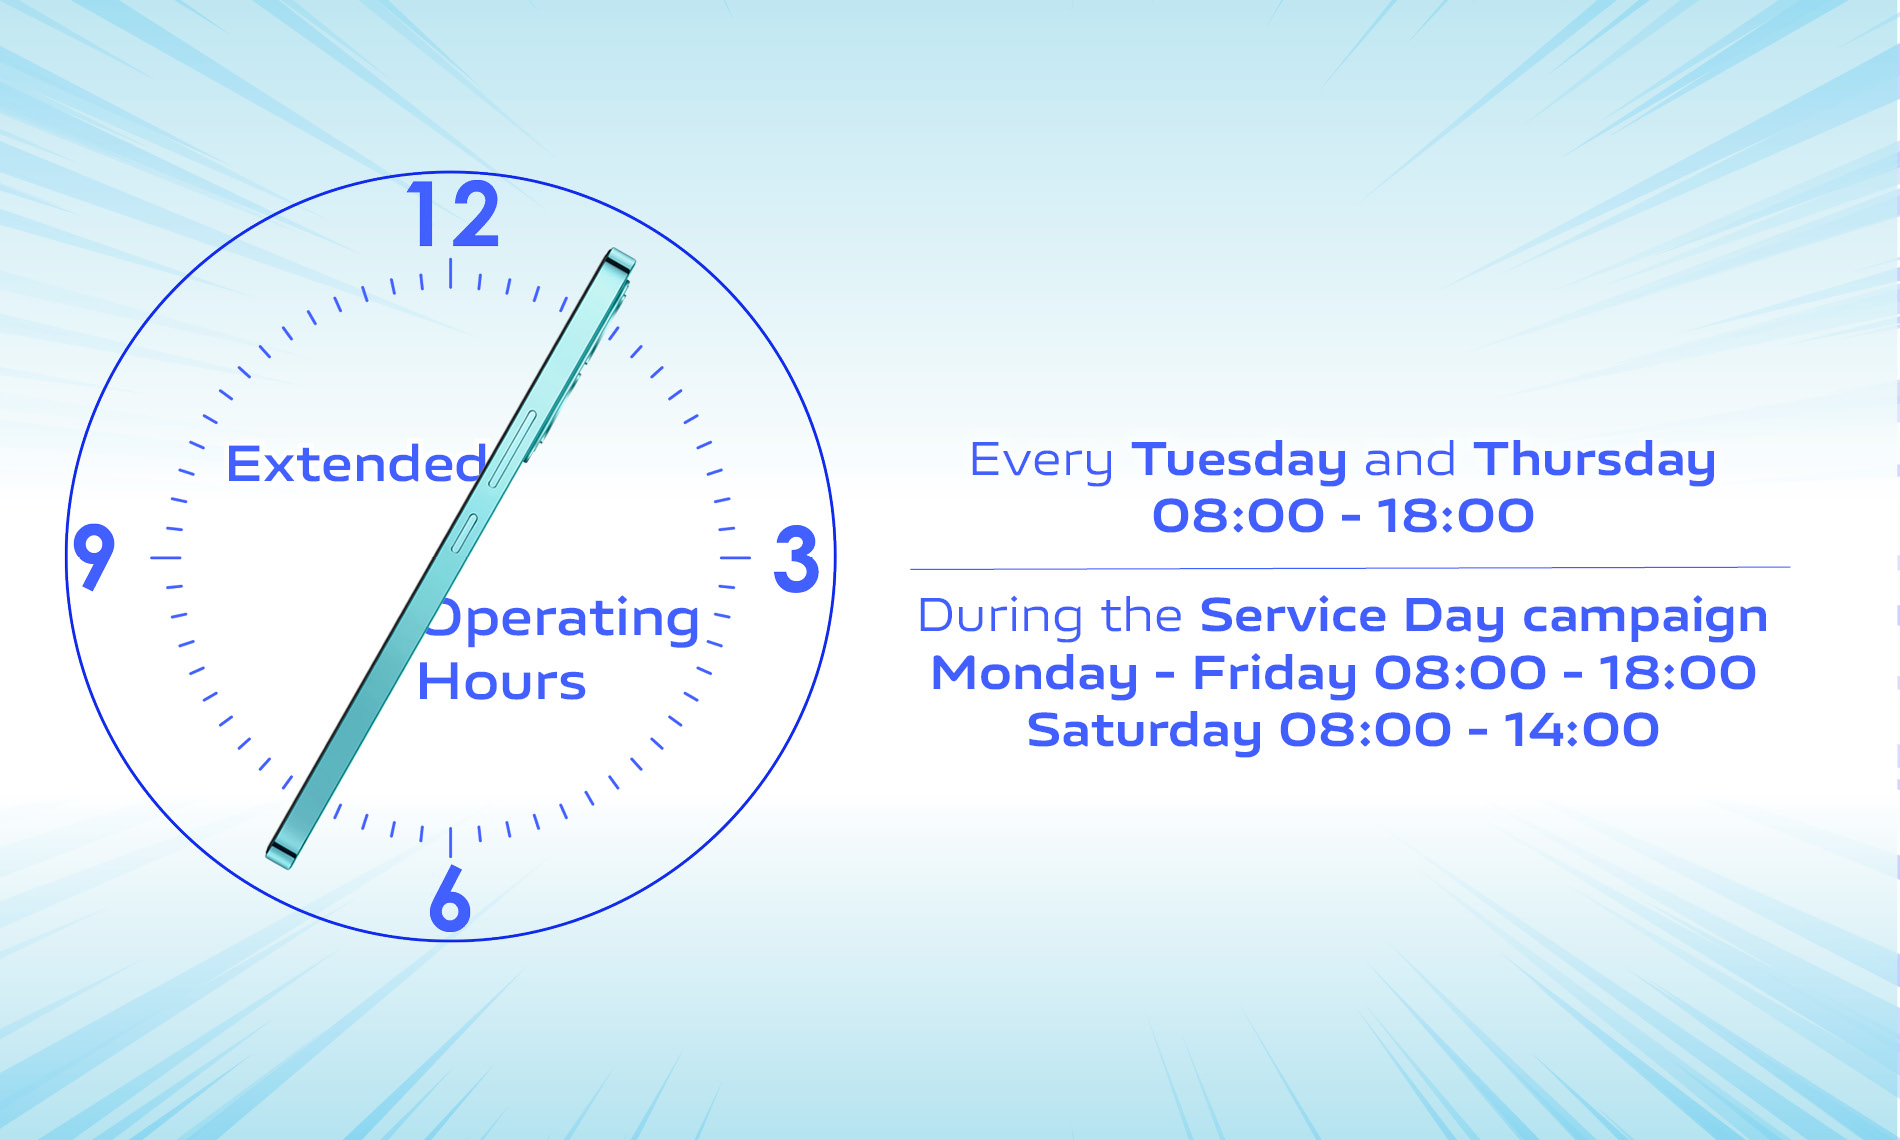 Extented Operating Hours